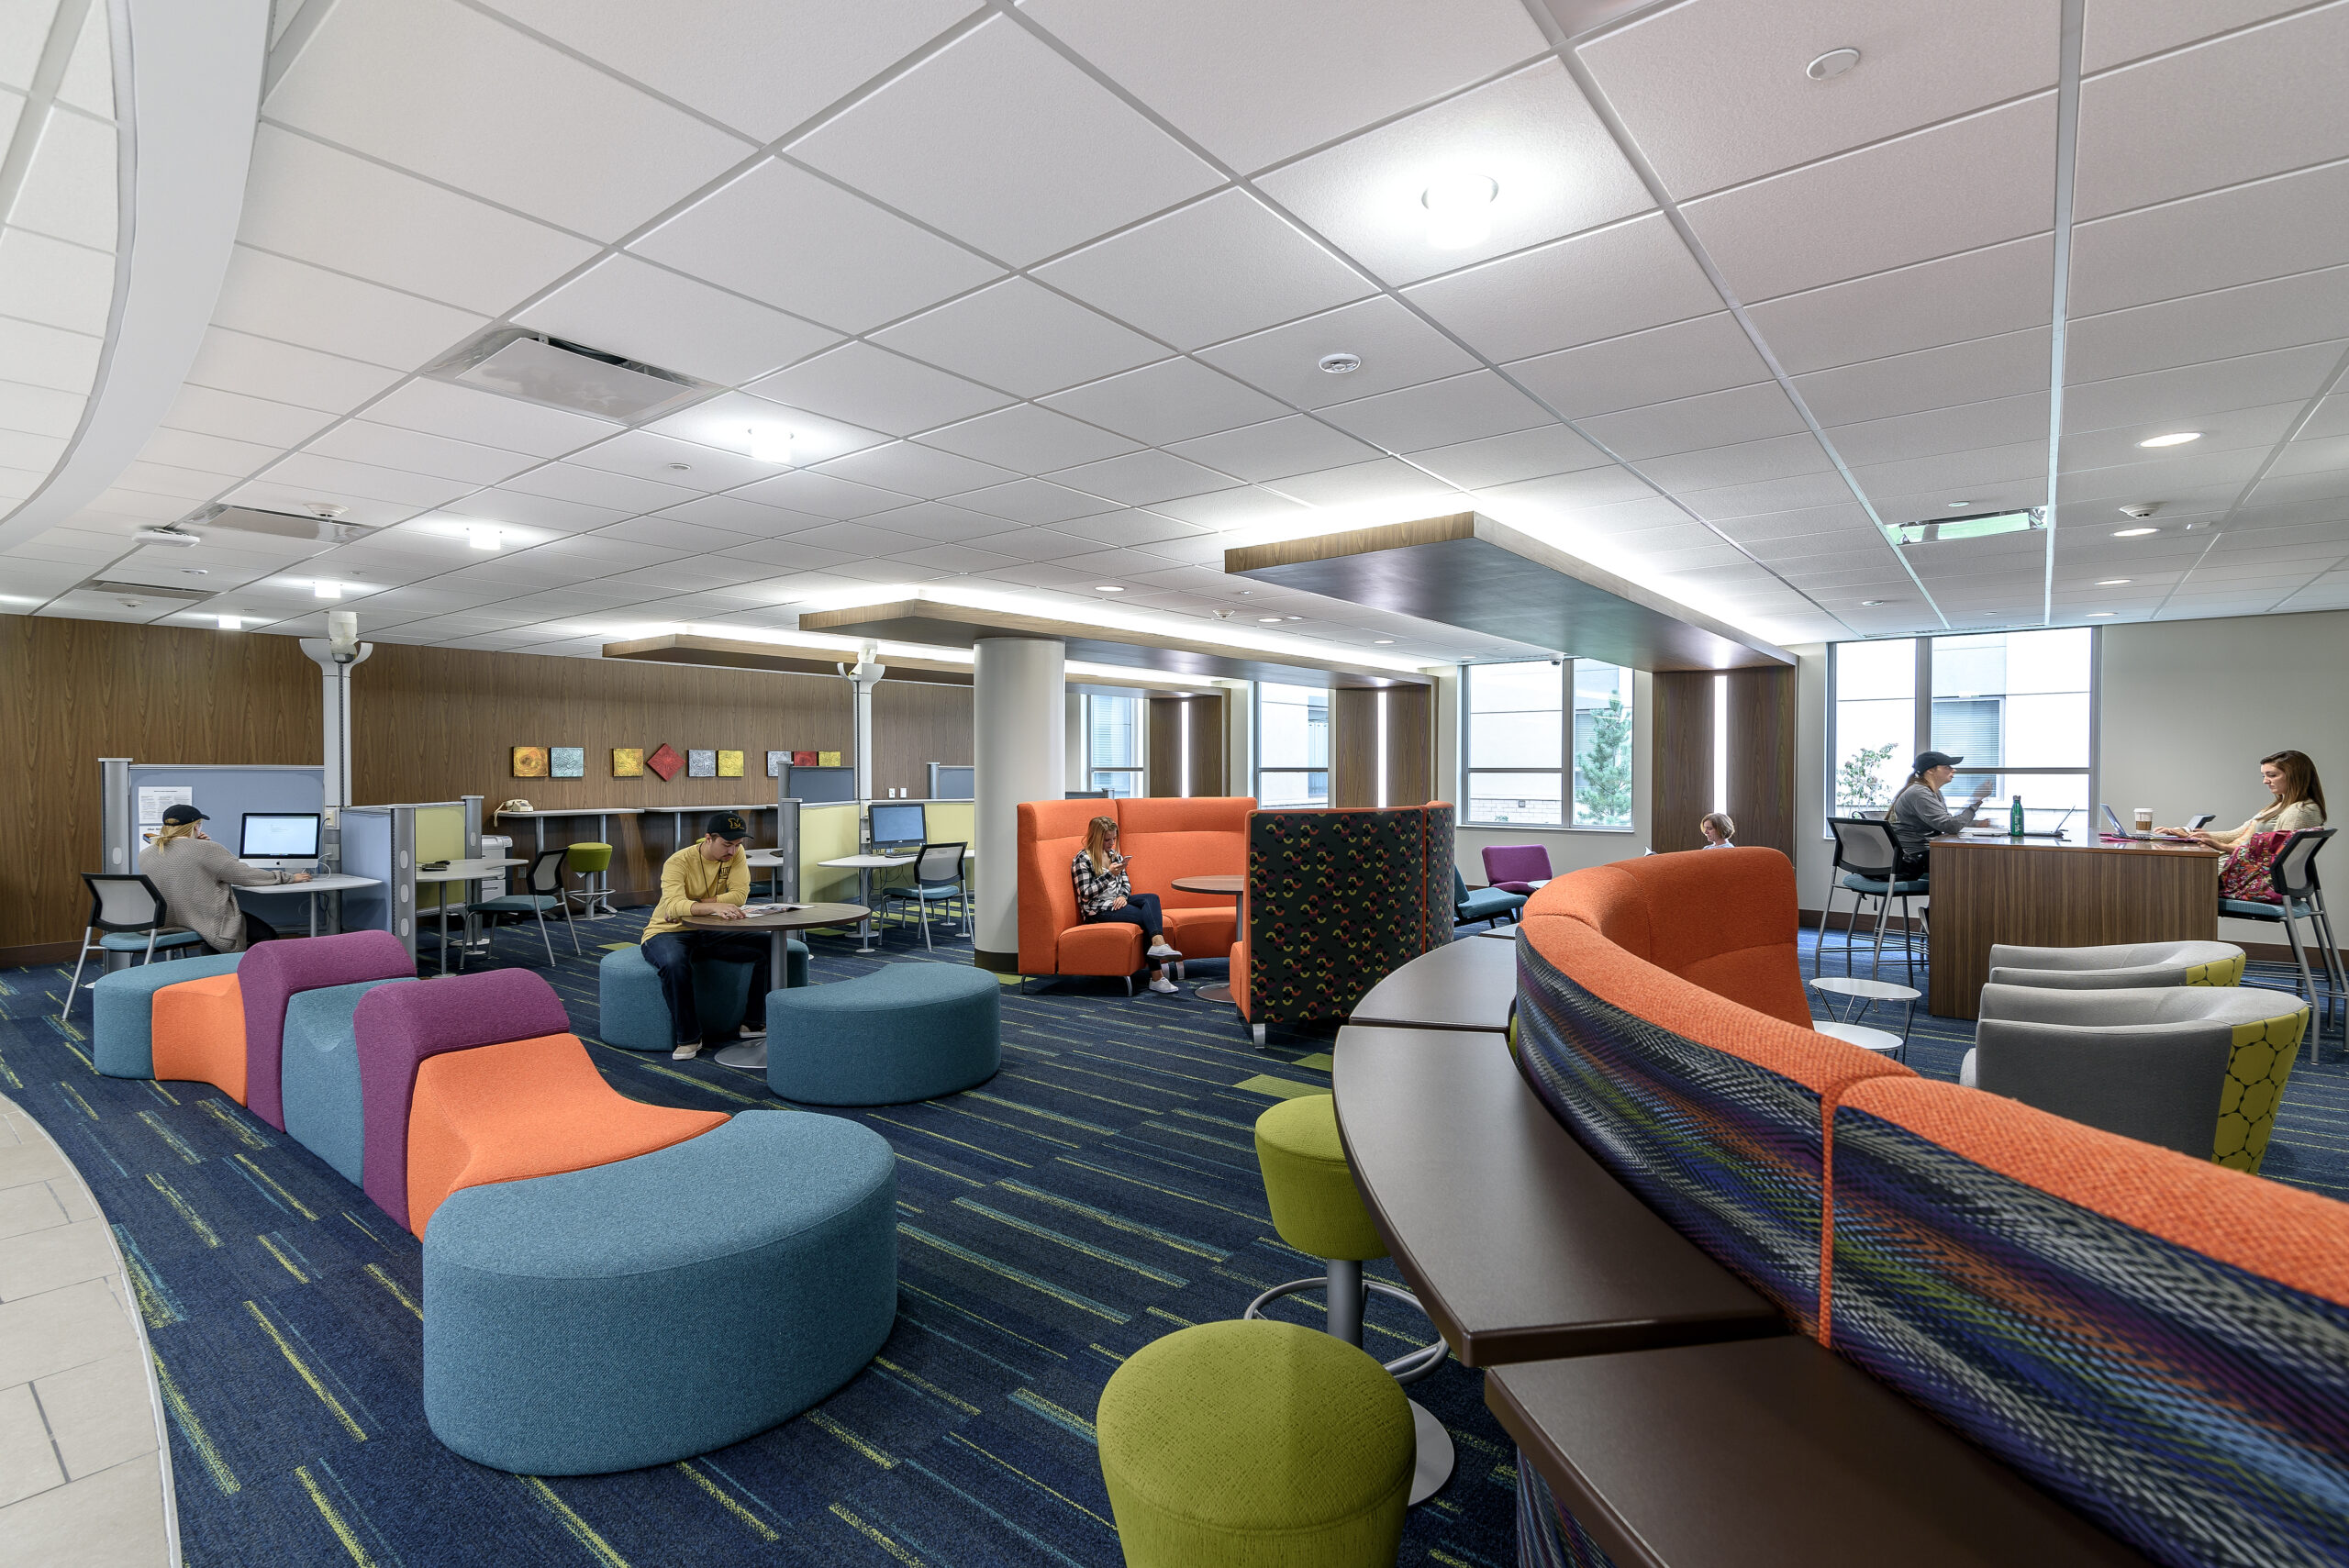 A number of college students relax, study, and work in a spacious, well-lit lounge area